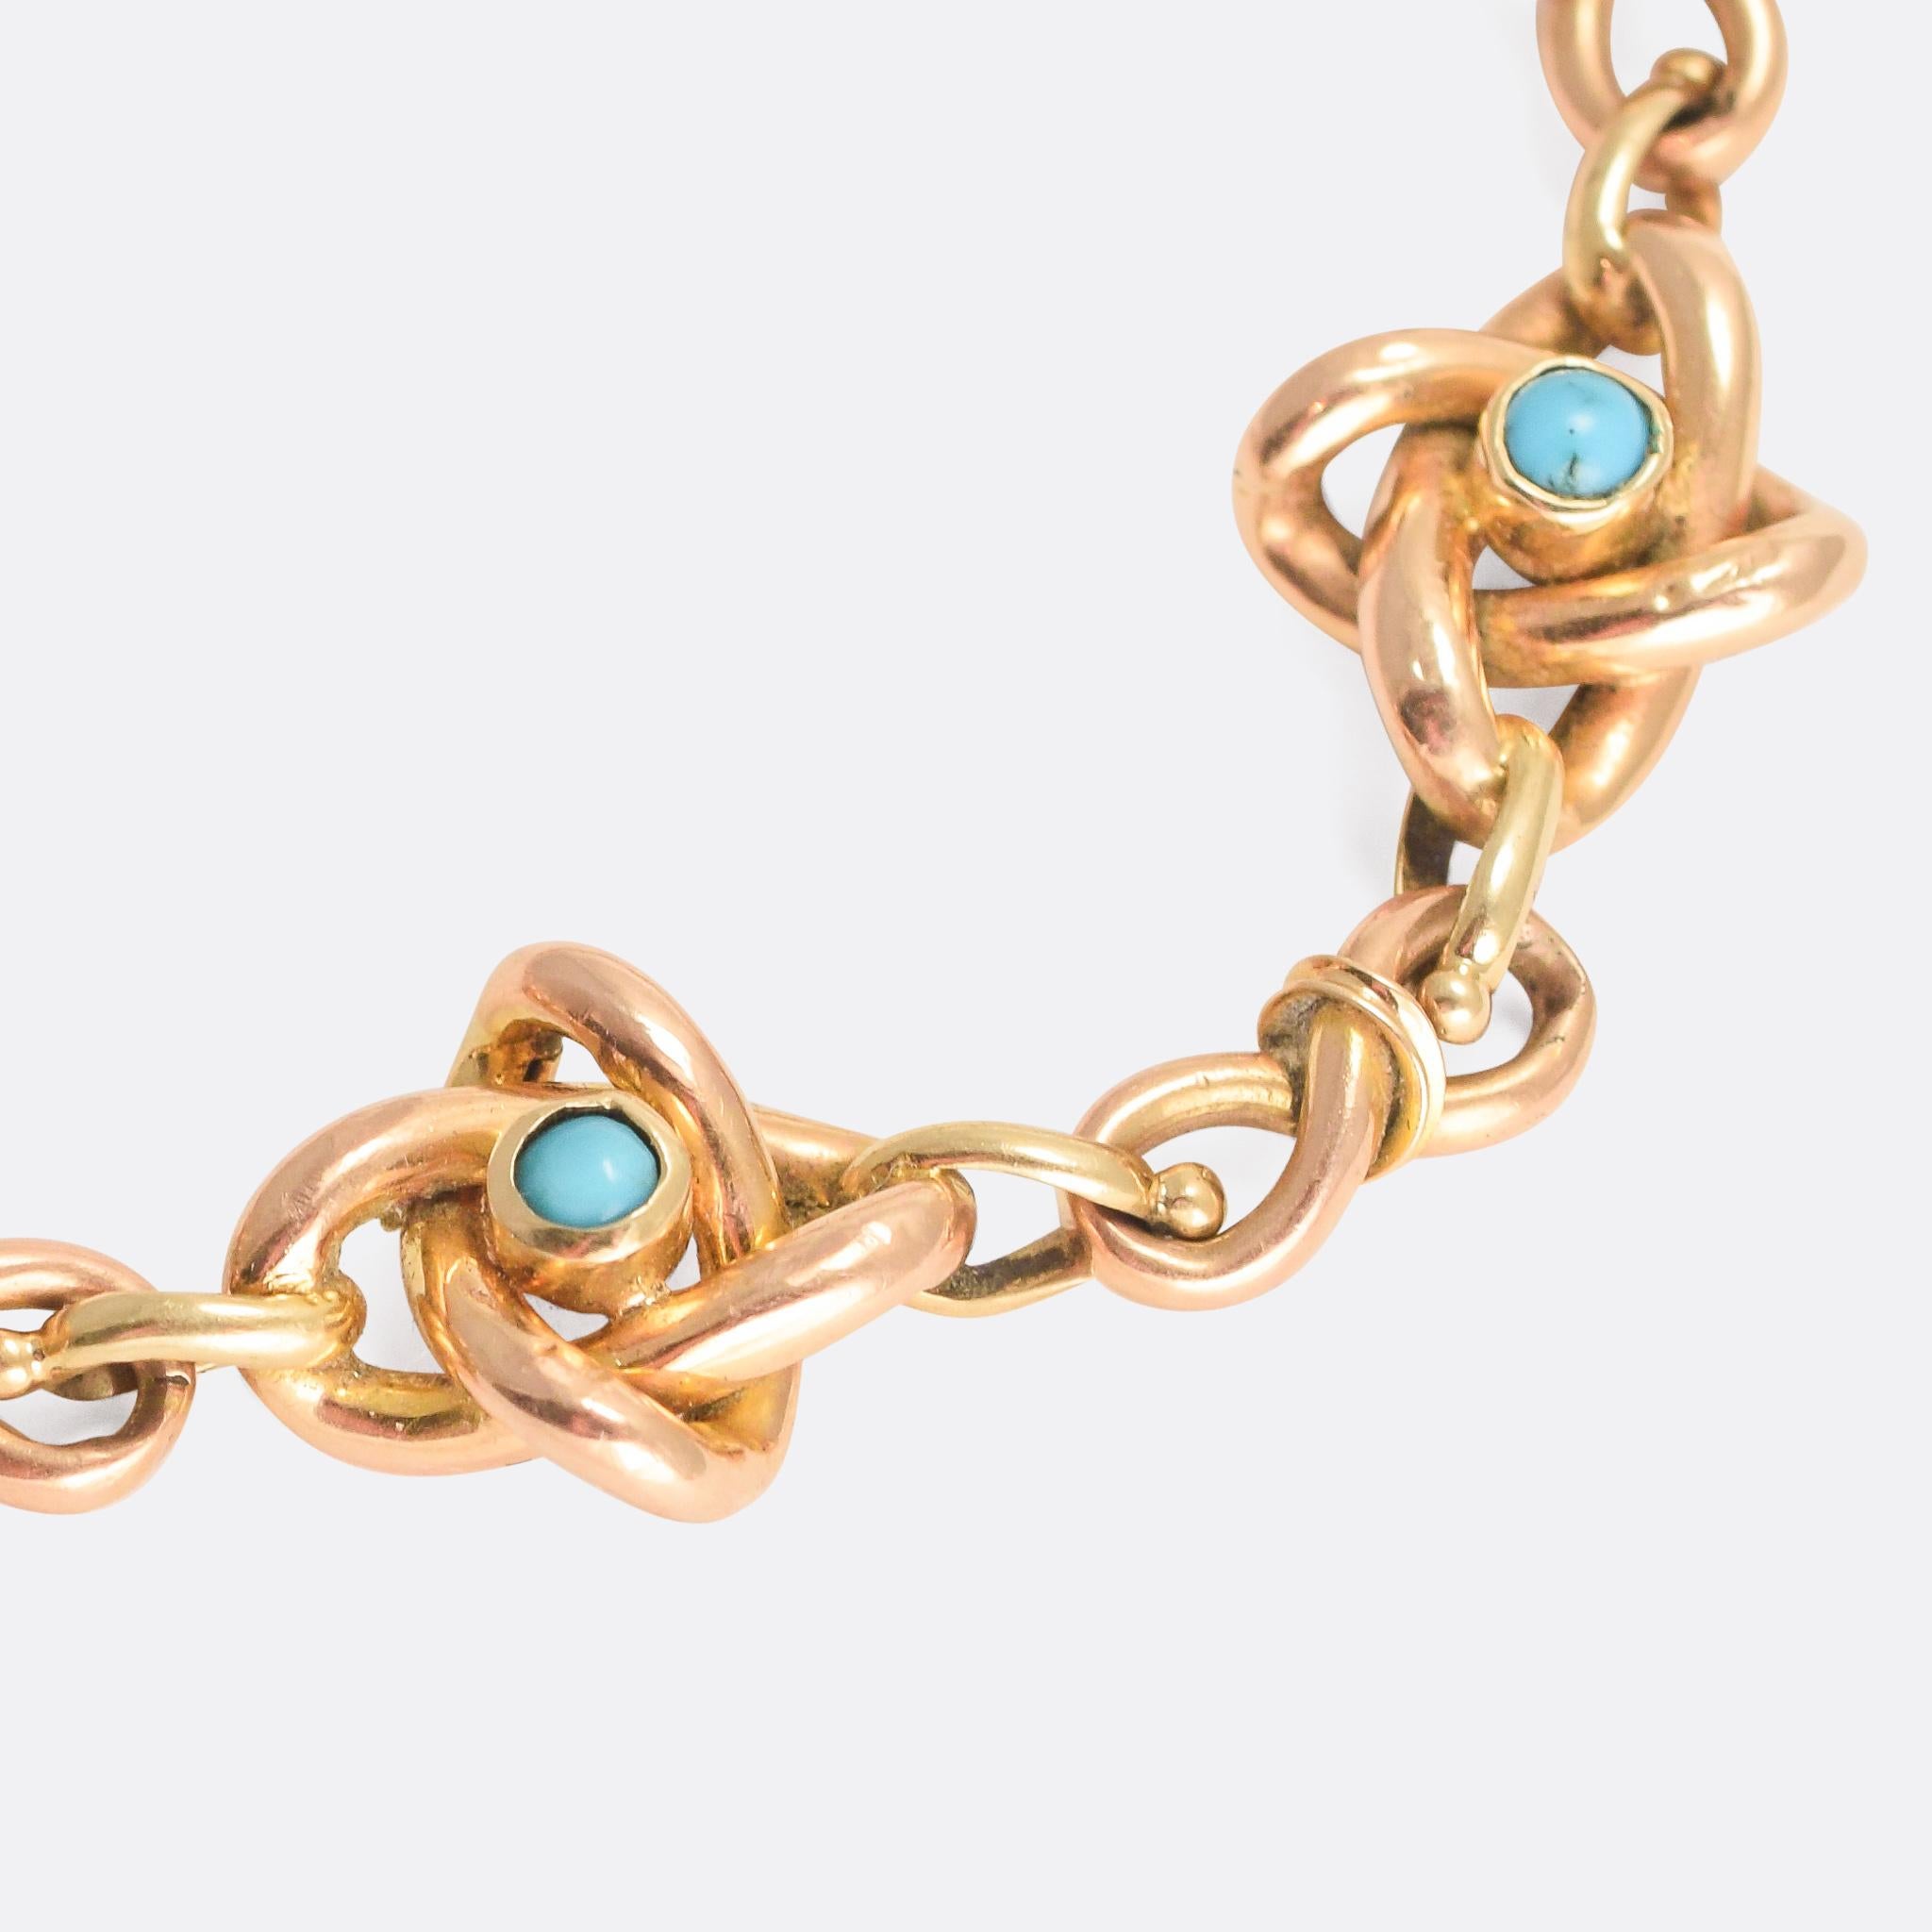 This elegant antique bracelet is modelled in 15k gold and set with Persian turquoise cabochons. The links are stylishly worked: alternating infinity loops, and gem set gold knot motifs - it dates from the turn of the 20th Century, circa 1900,